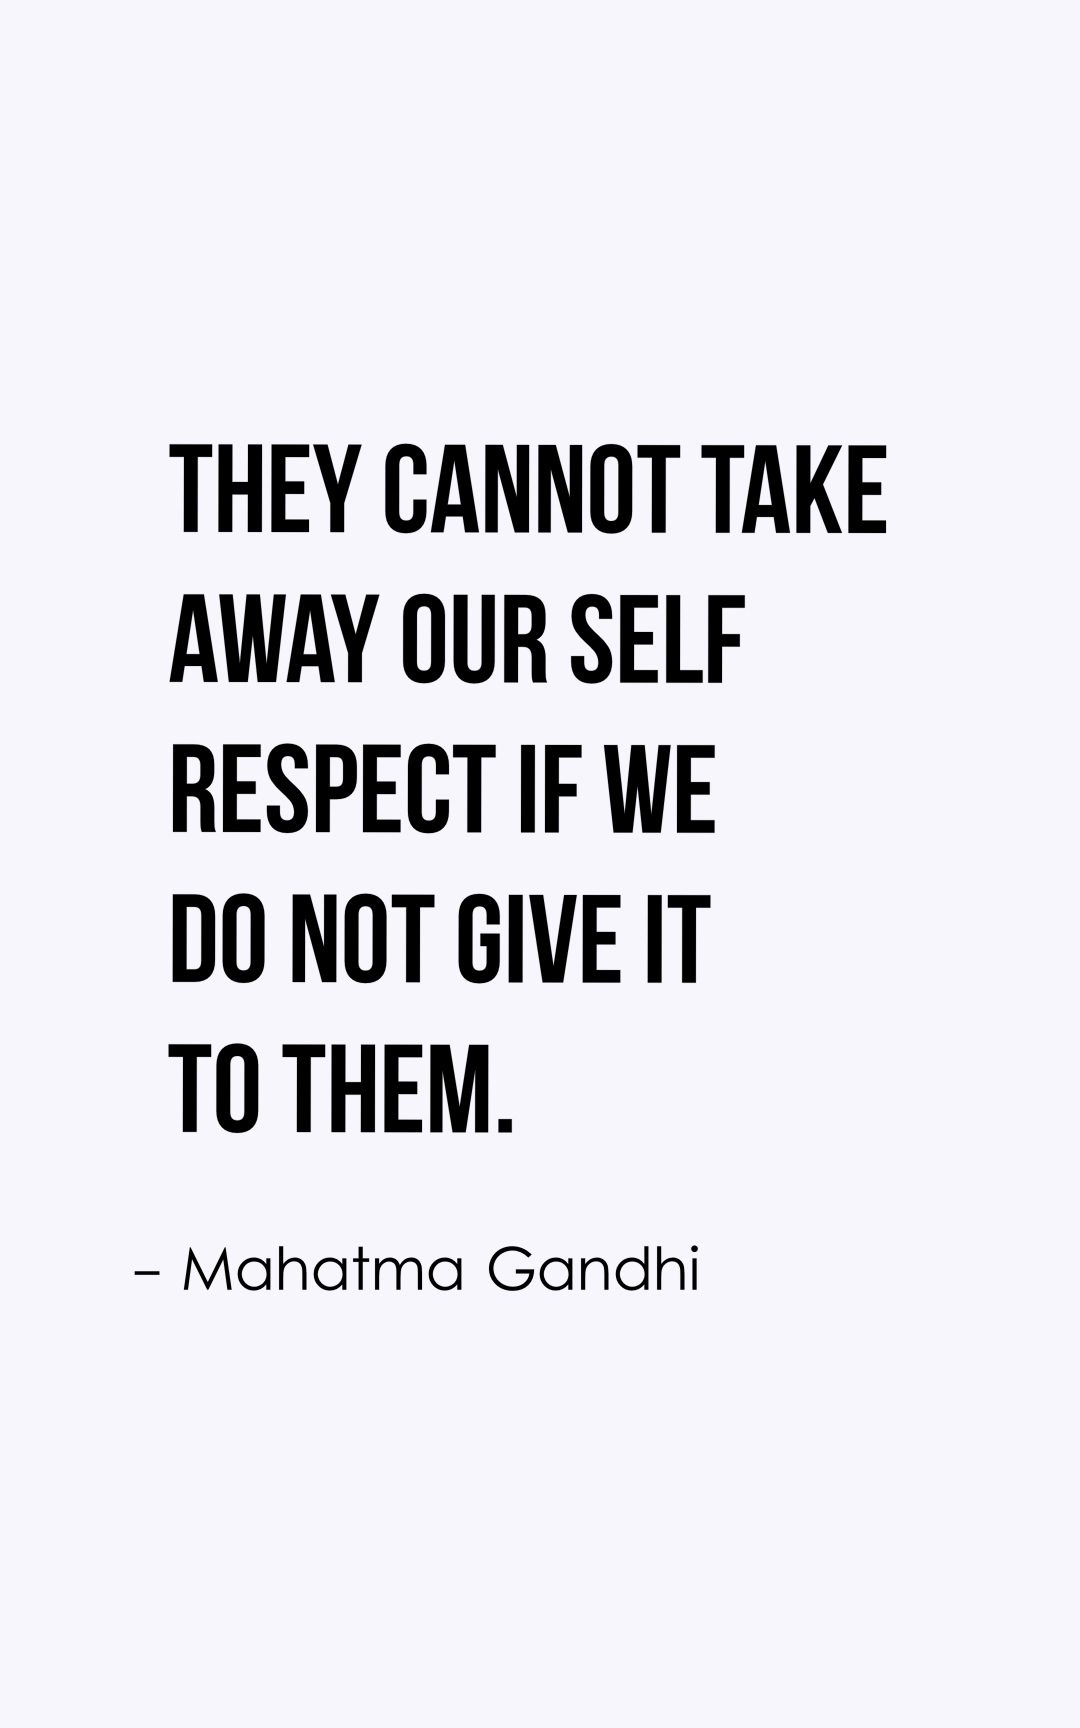 They cannot take away our self respect if we do not give it to them.